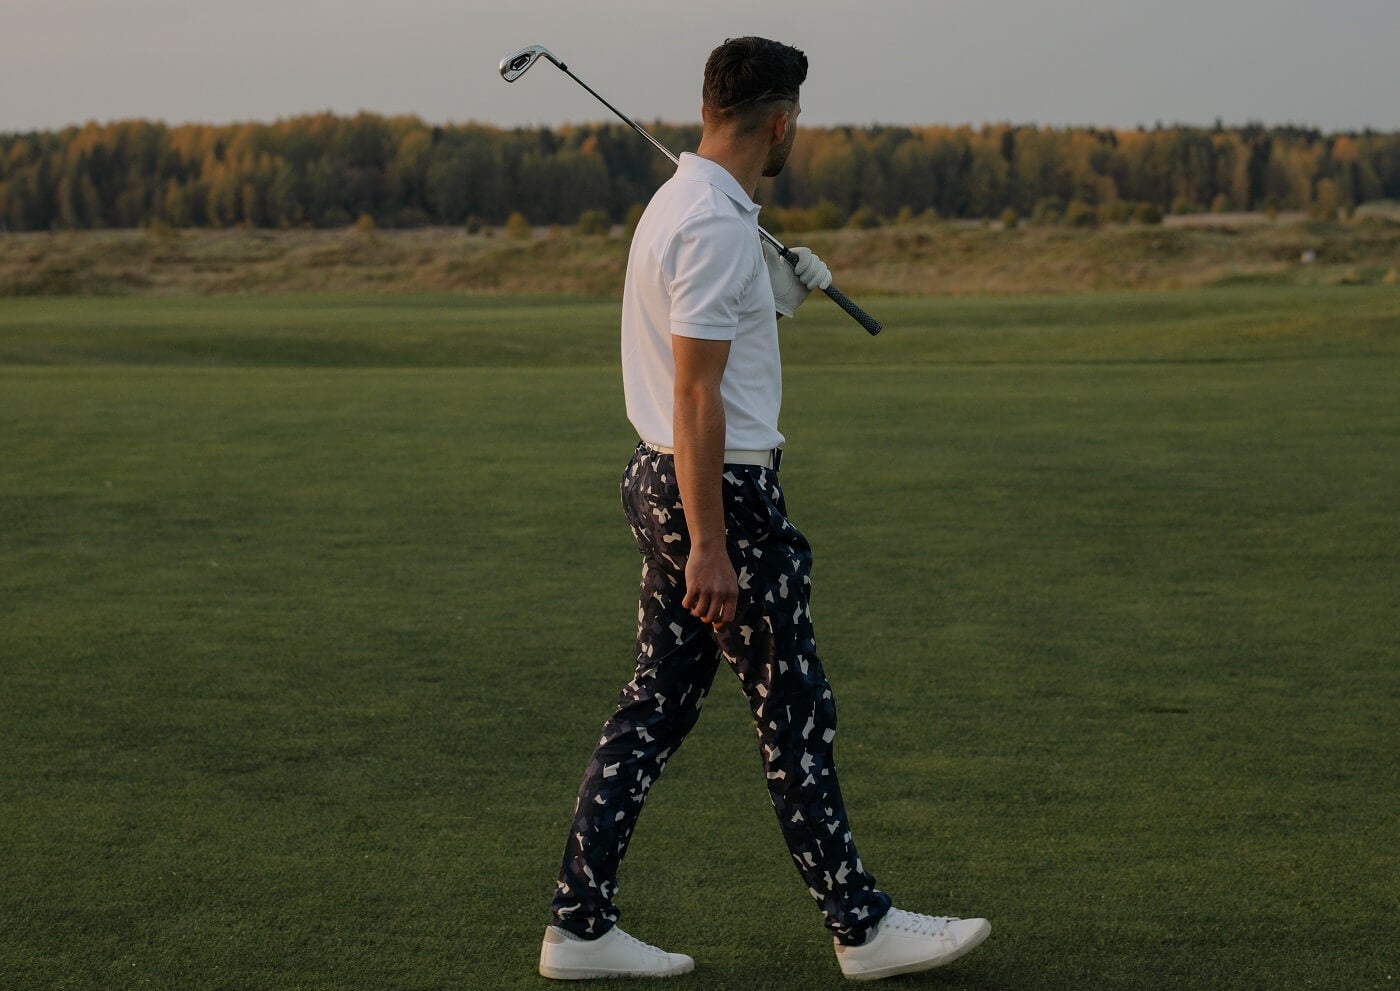 FUNKY LOUD GOLF TROUSERS by Bedlam Golf - 6 Styles - Sizes 30-42 Waist  £24.99 - PicClick UK